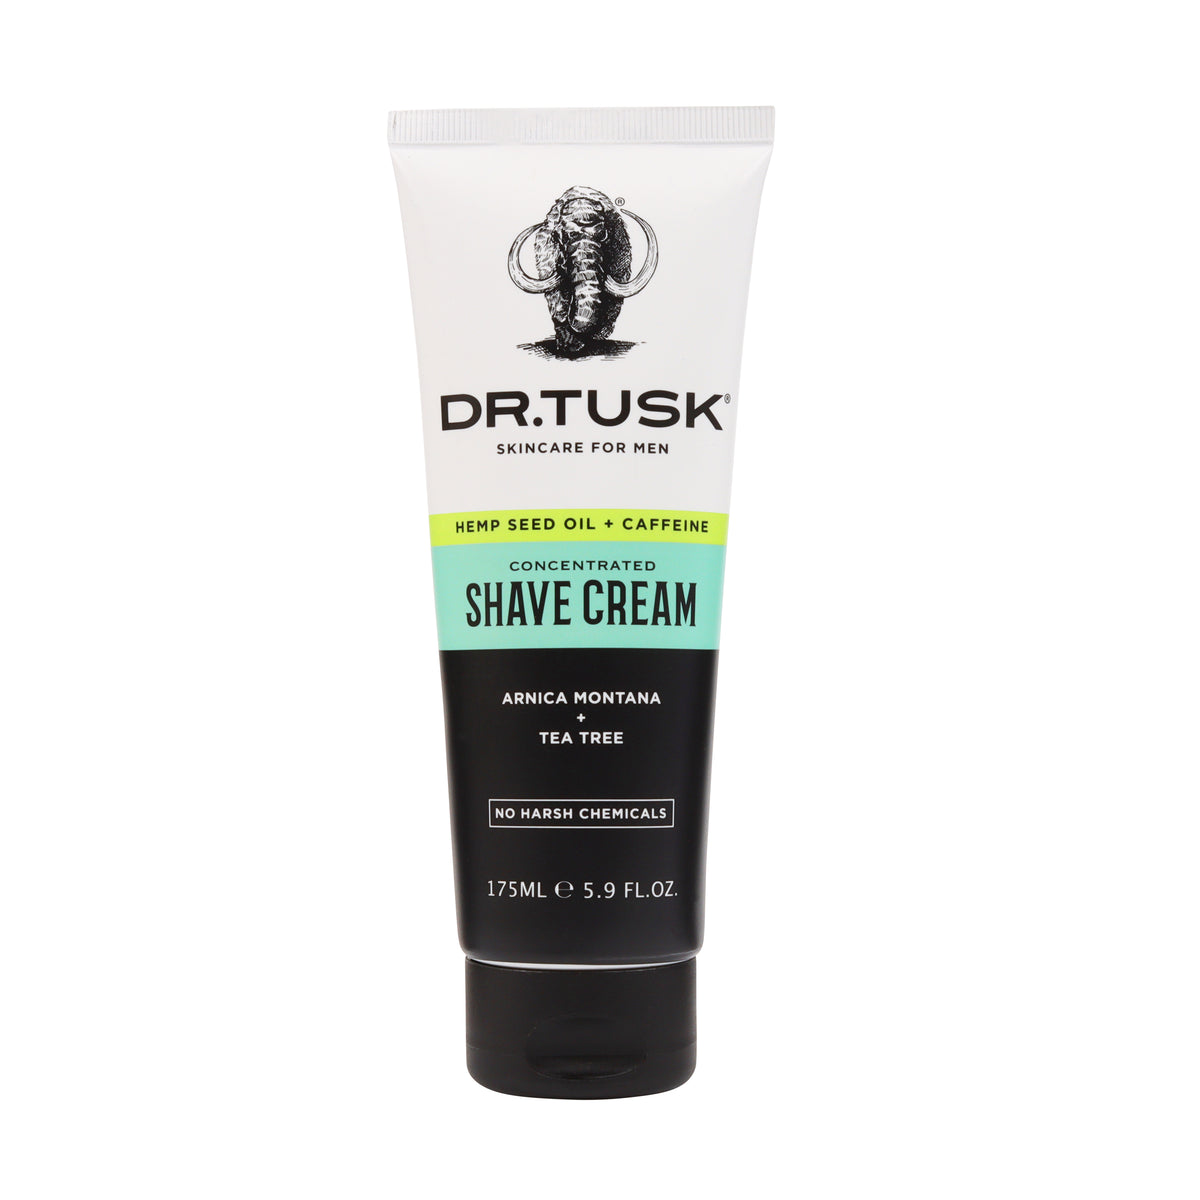 CONCENTRATED SHAVE CREAM